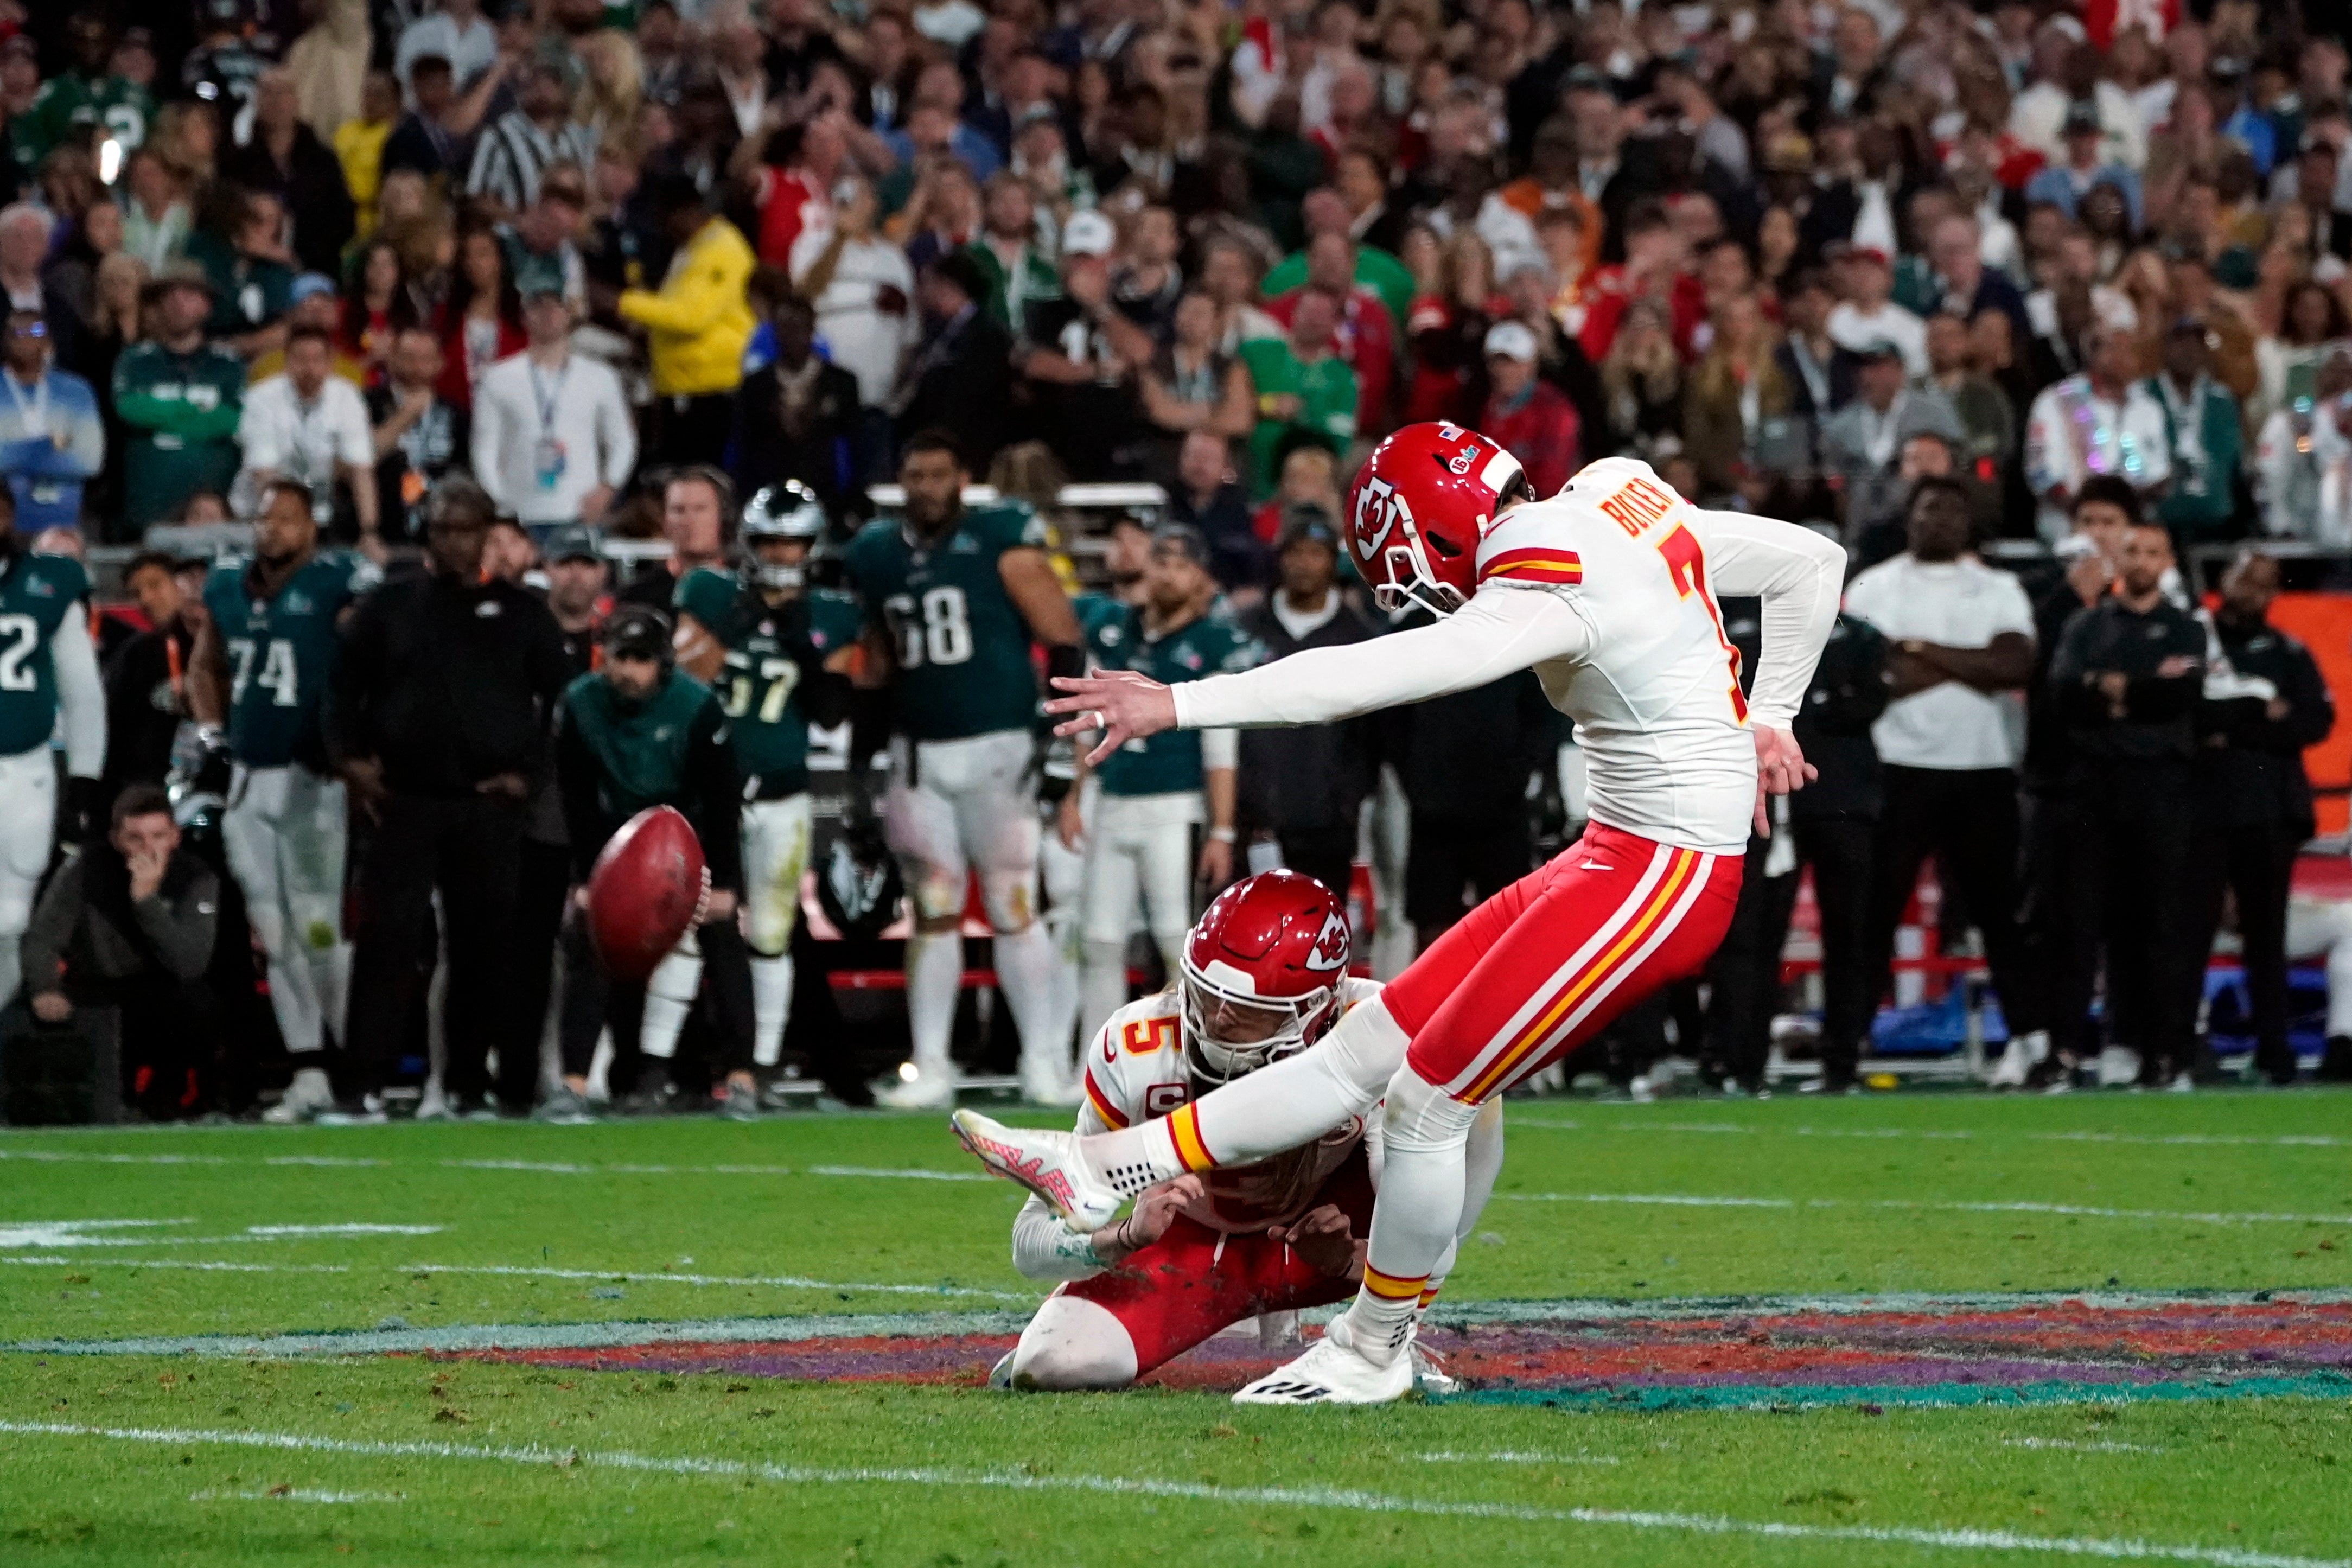 Kansas City Chiefs' kicker Harrison Butker scores the winning points during Super Bowl LVII between the Kansas City Chiefs and the Philadelphia Eagles at State Farm Stadium in Glendale, Arizona, on 12 February 2023. The player has come under fire for remarks he made at a Roman Catholic university earlier this month